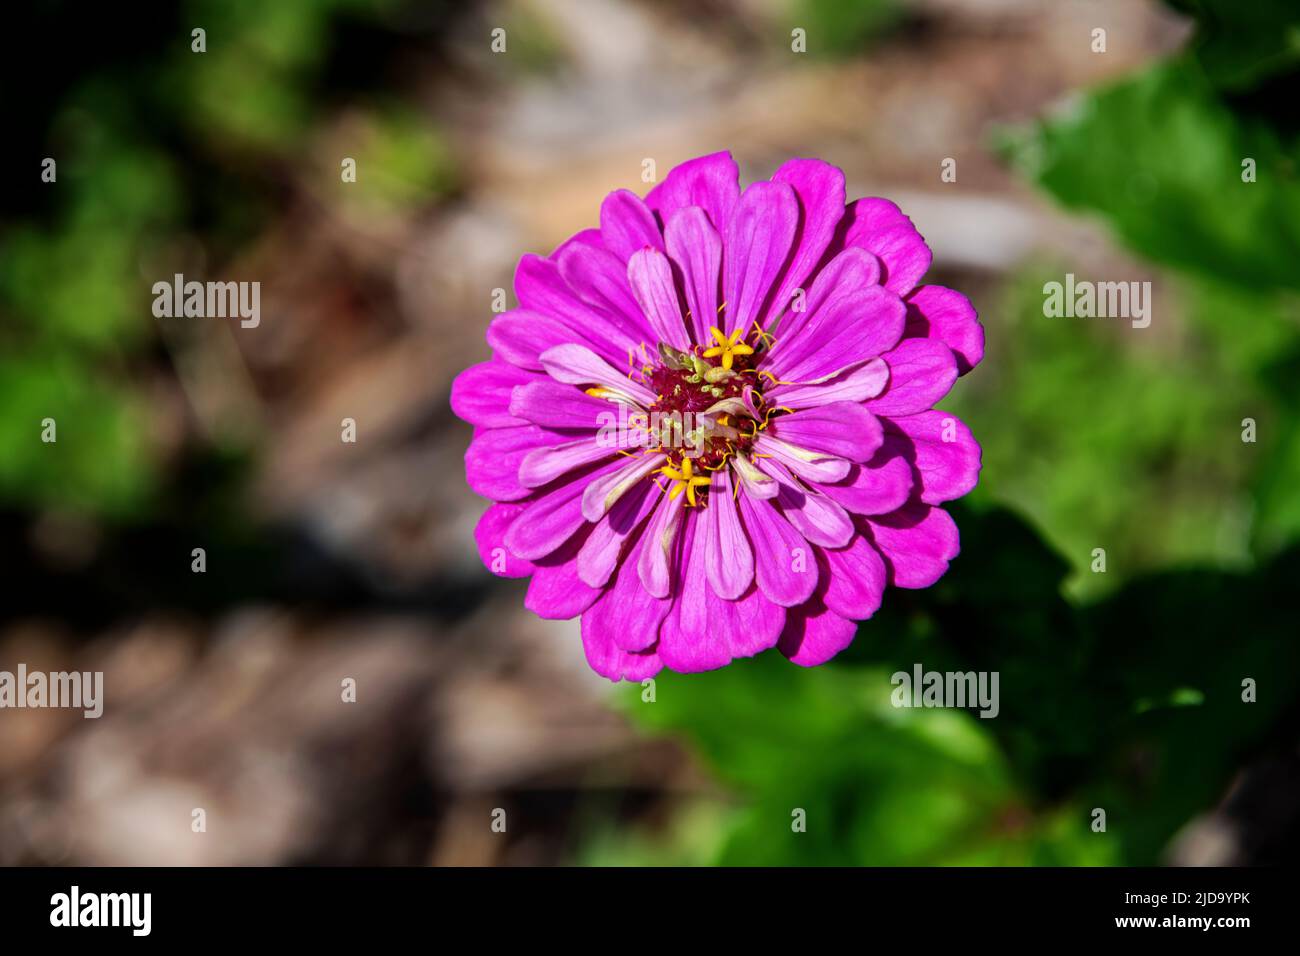 Near view of a pink daisy with petals, sepals, stem and pollen Stock Photo